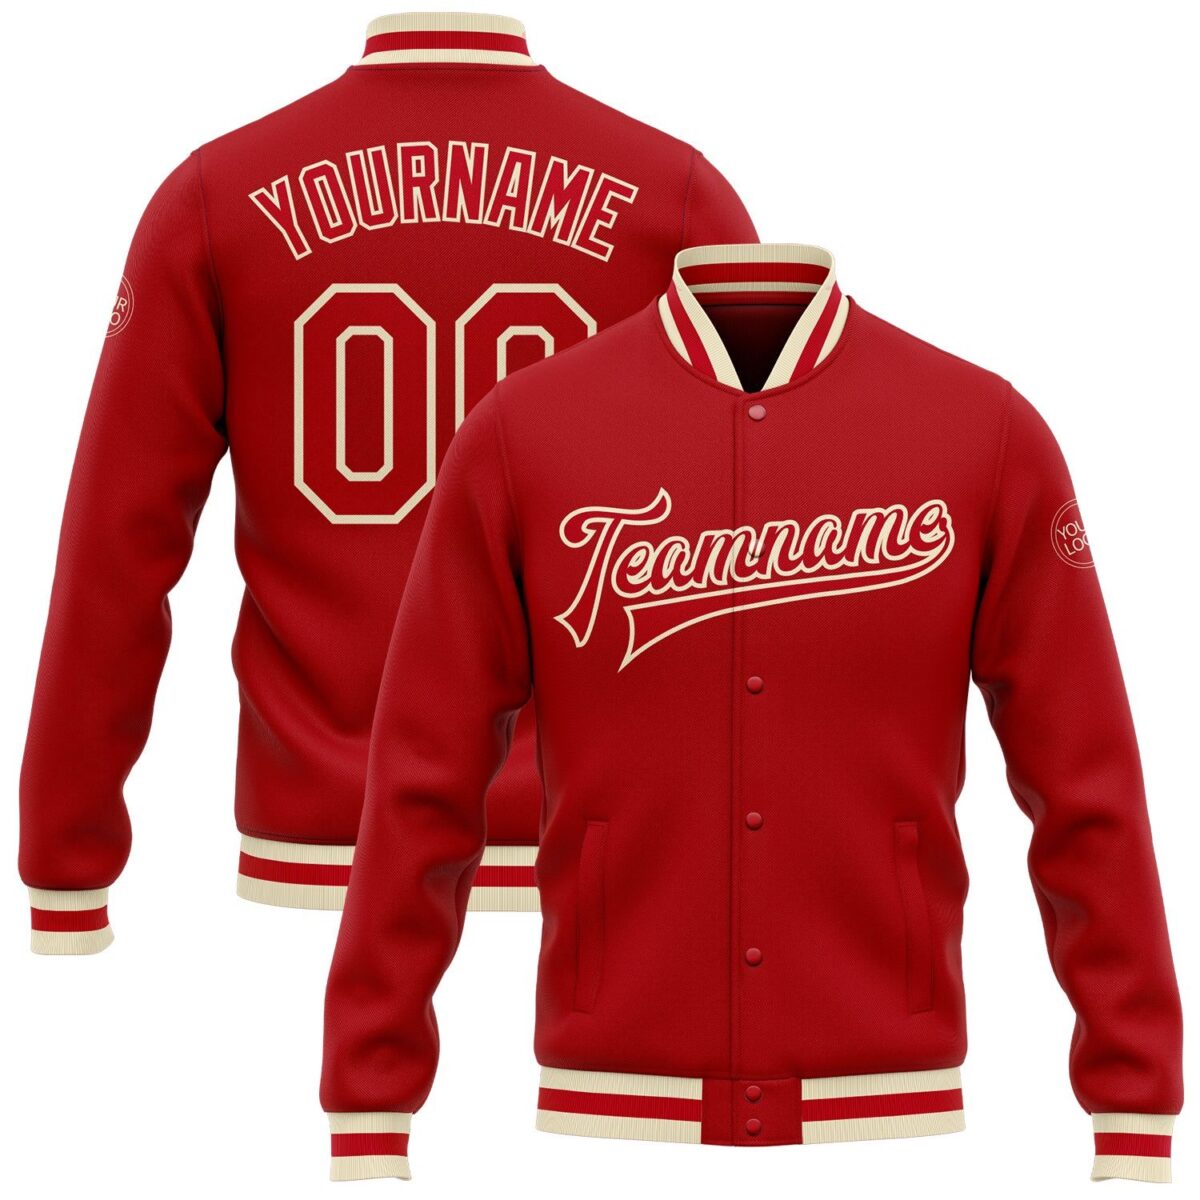 College Student Baseball Jackets with Red & White (1) 1